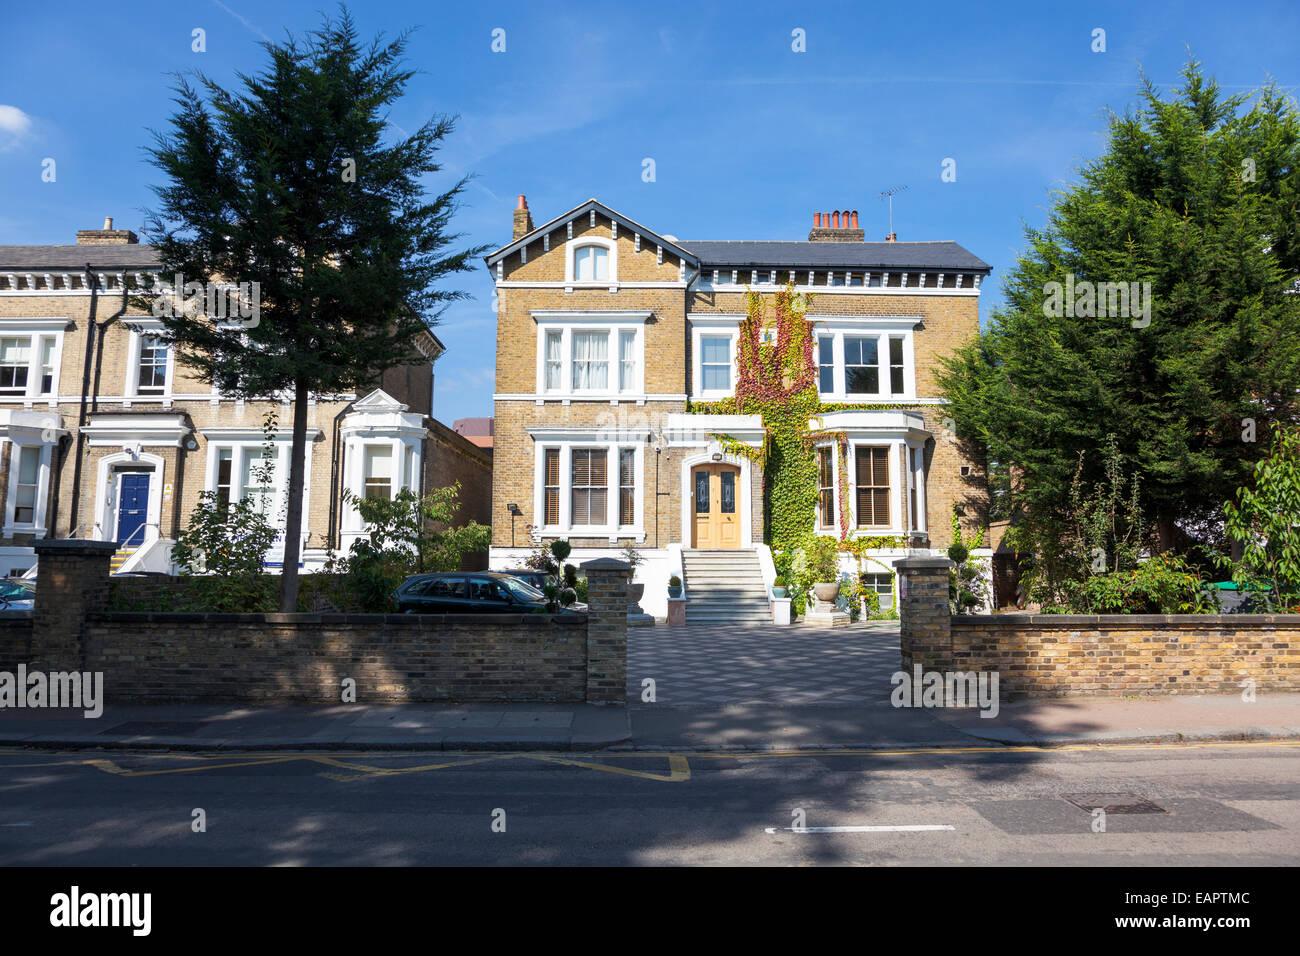 A family house in London suburb Stock Photo